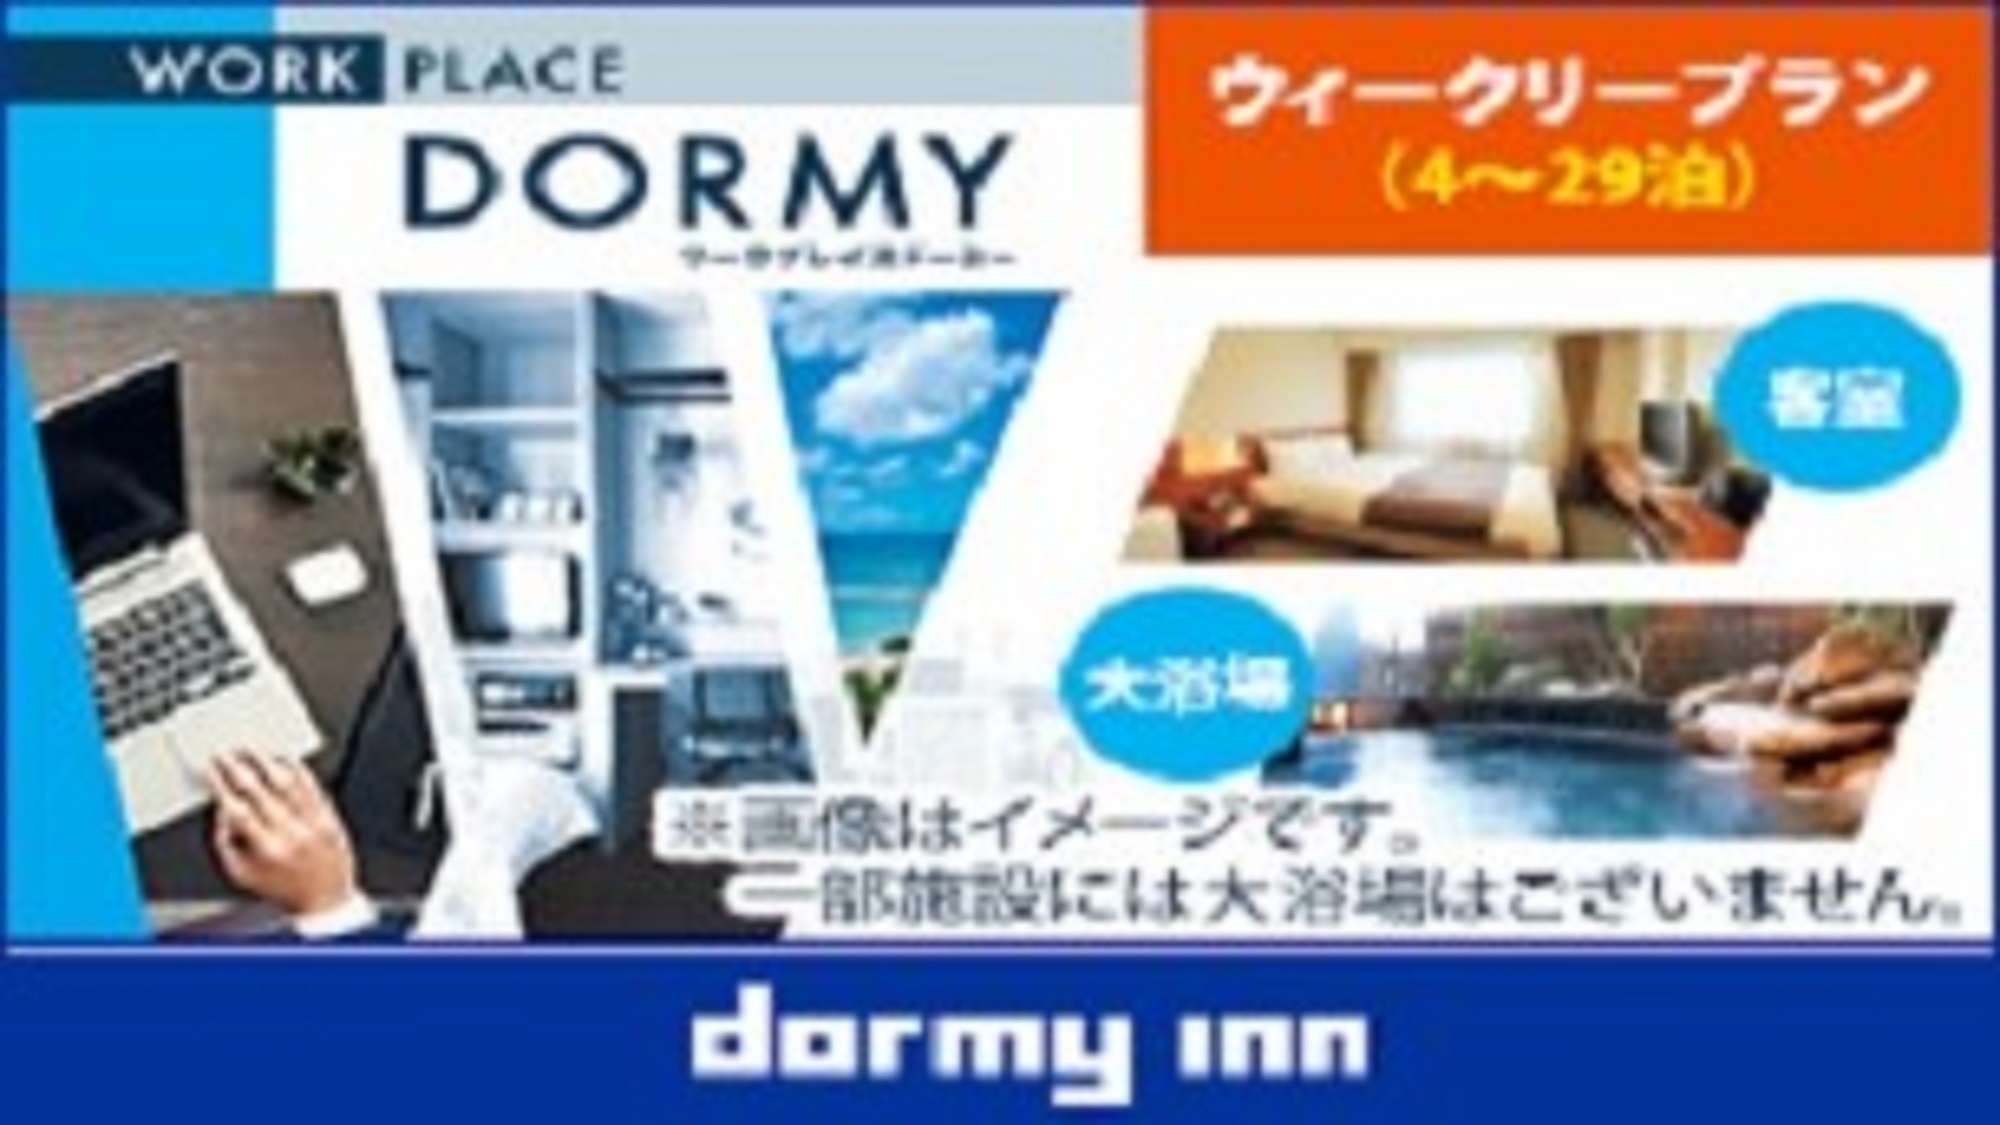 【WORK PLACE DORMY】ウィークリープラン（4〜29泊）≪素泊≫